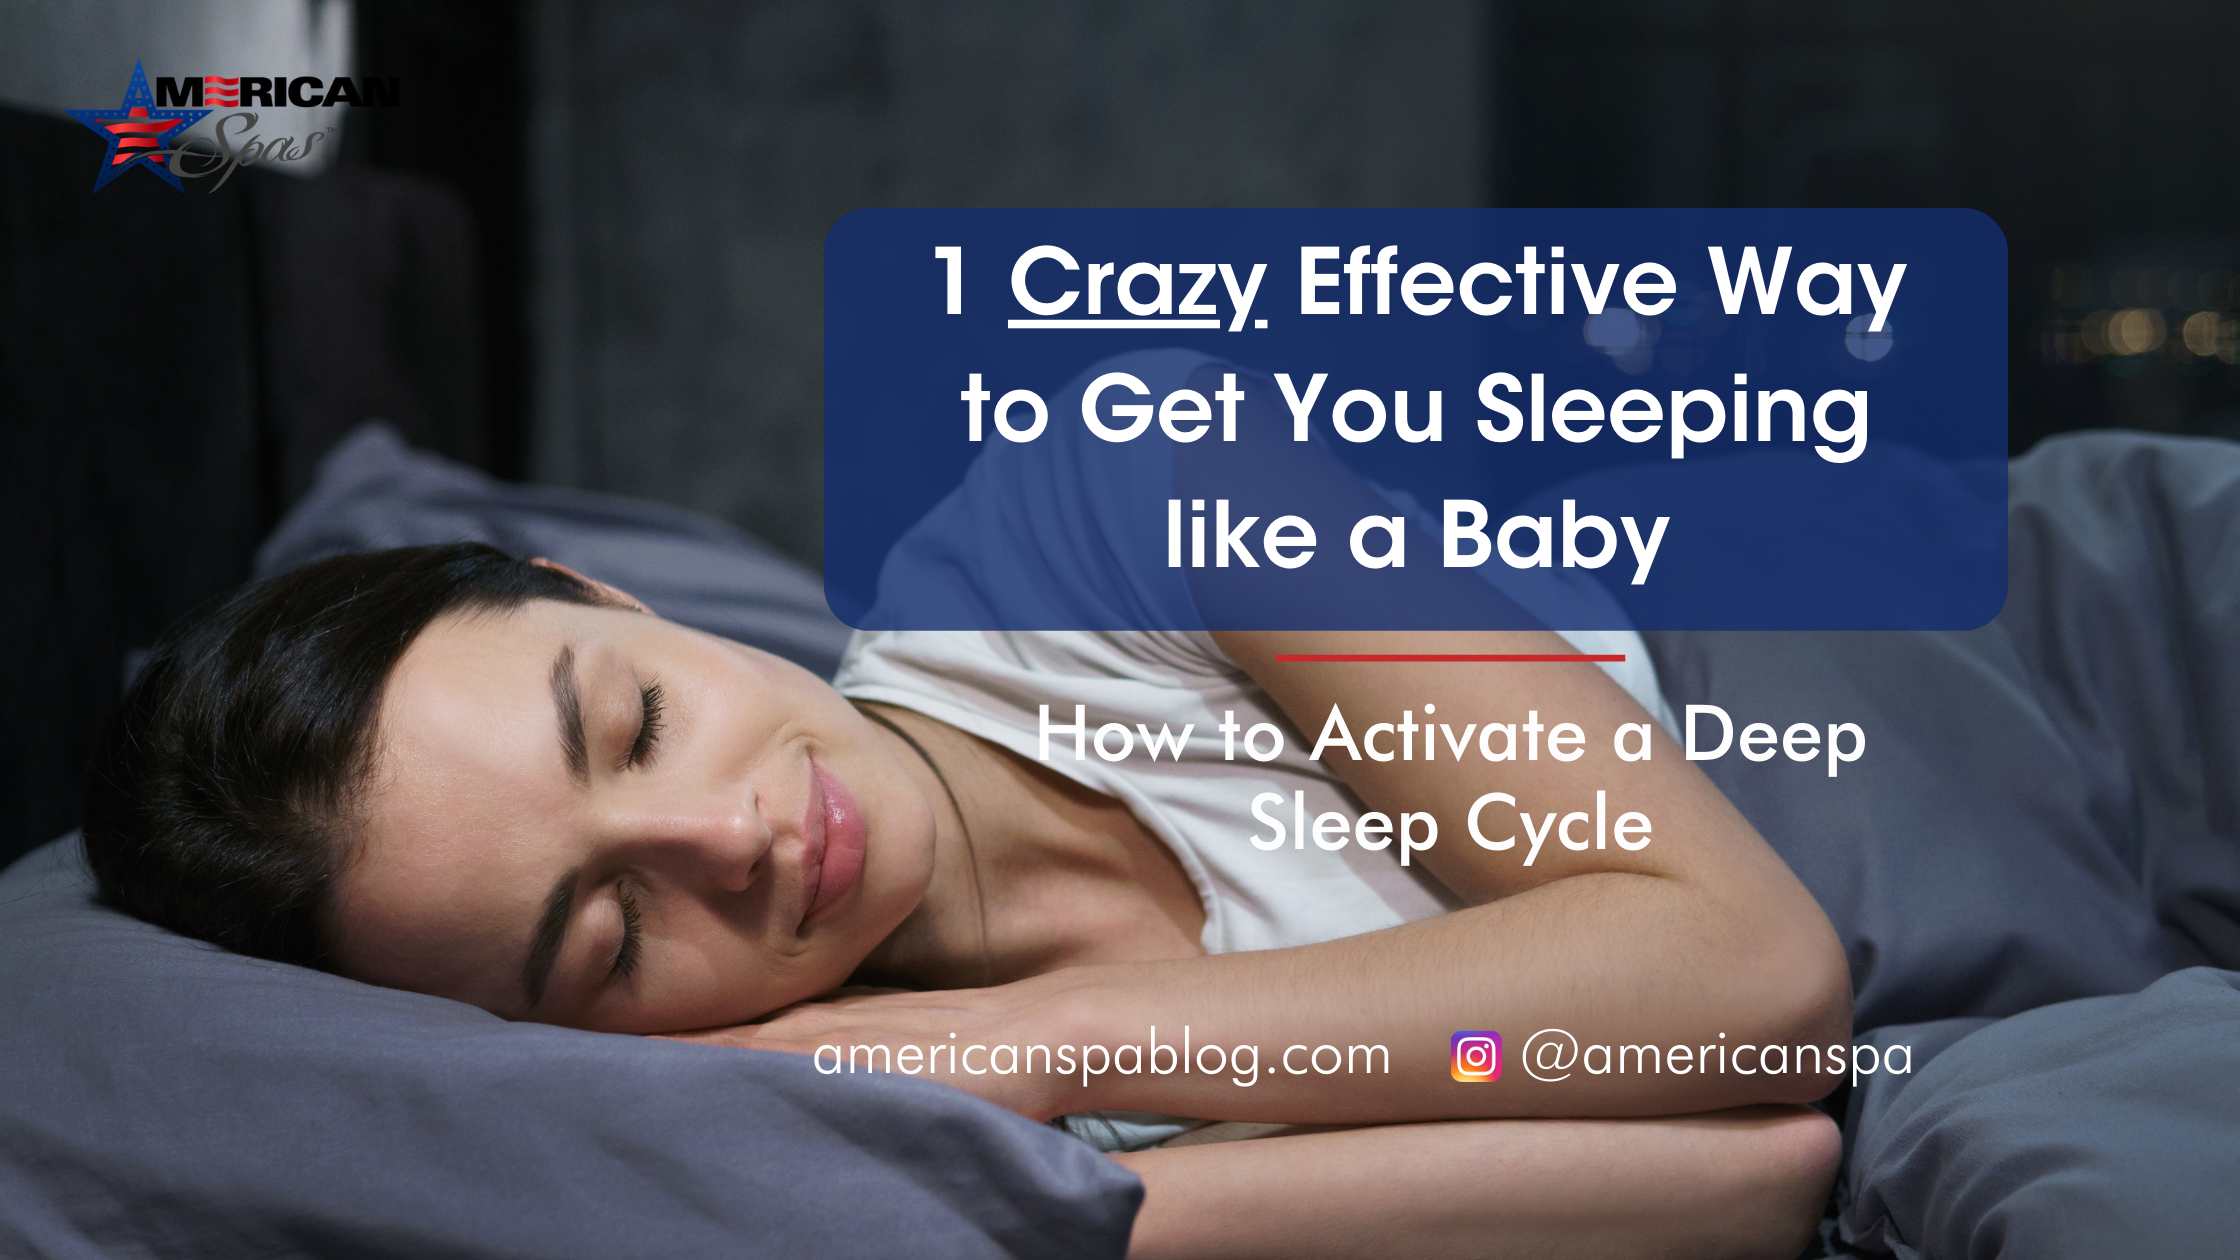 1 Crazy Effective Way to Get You Sleeping like a Baby